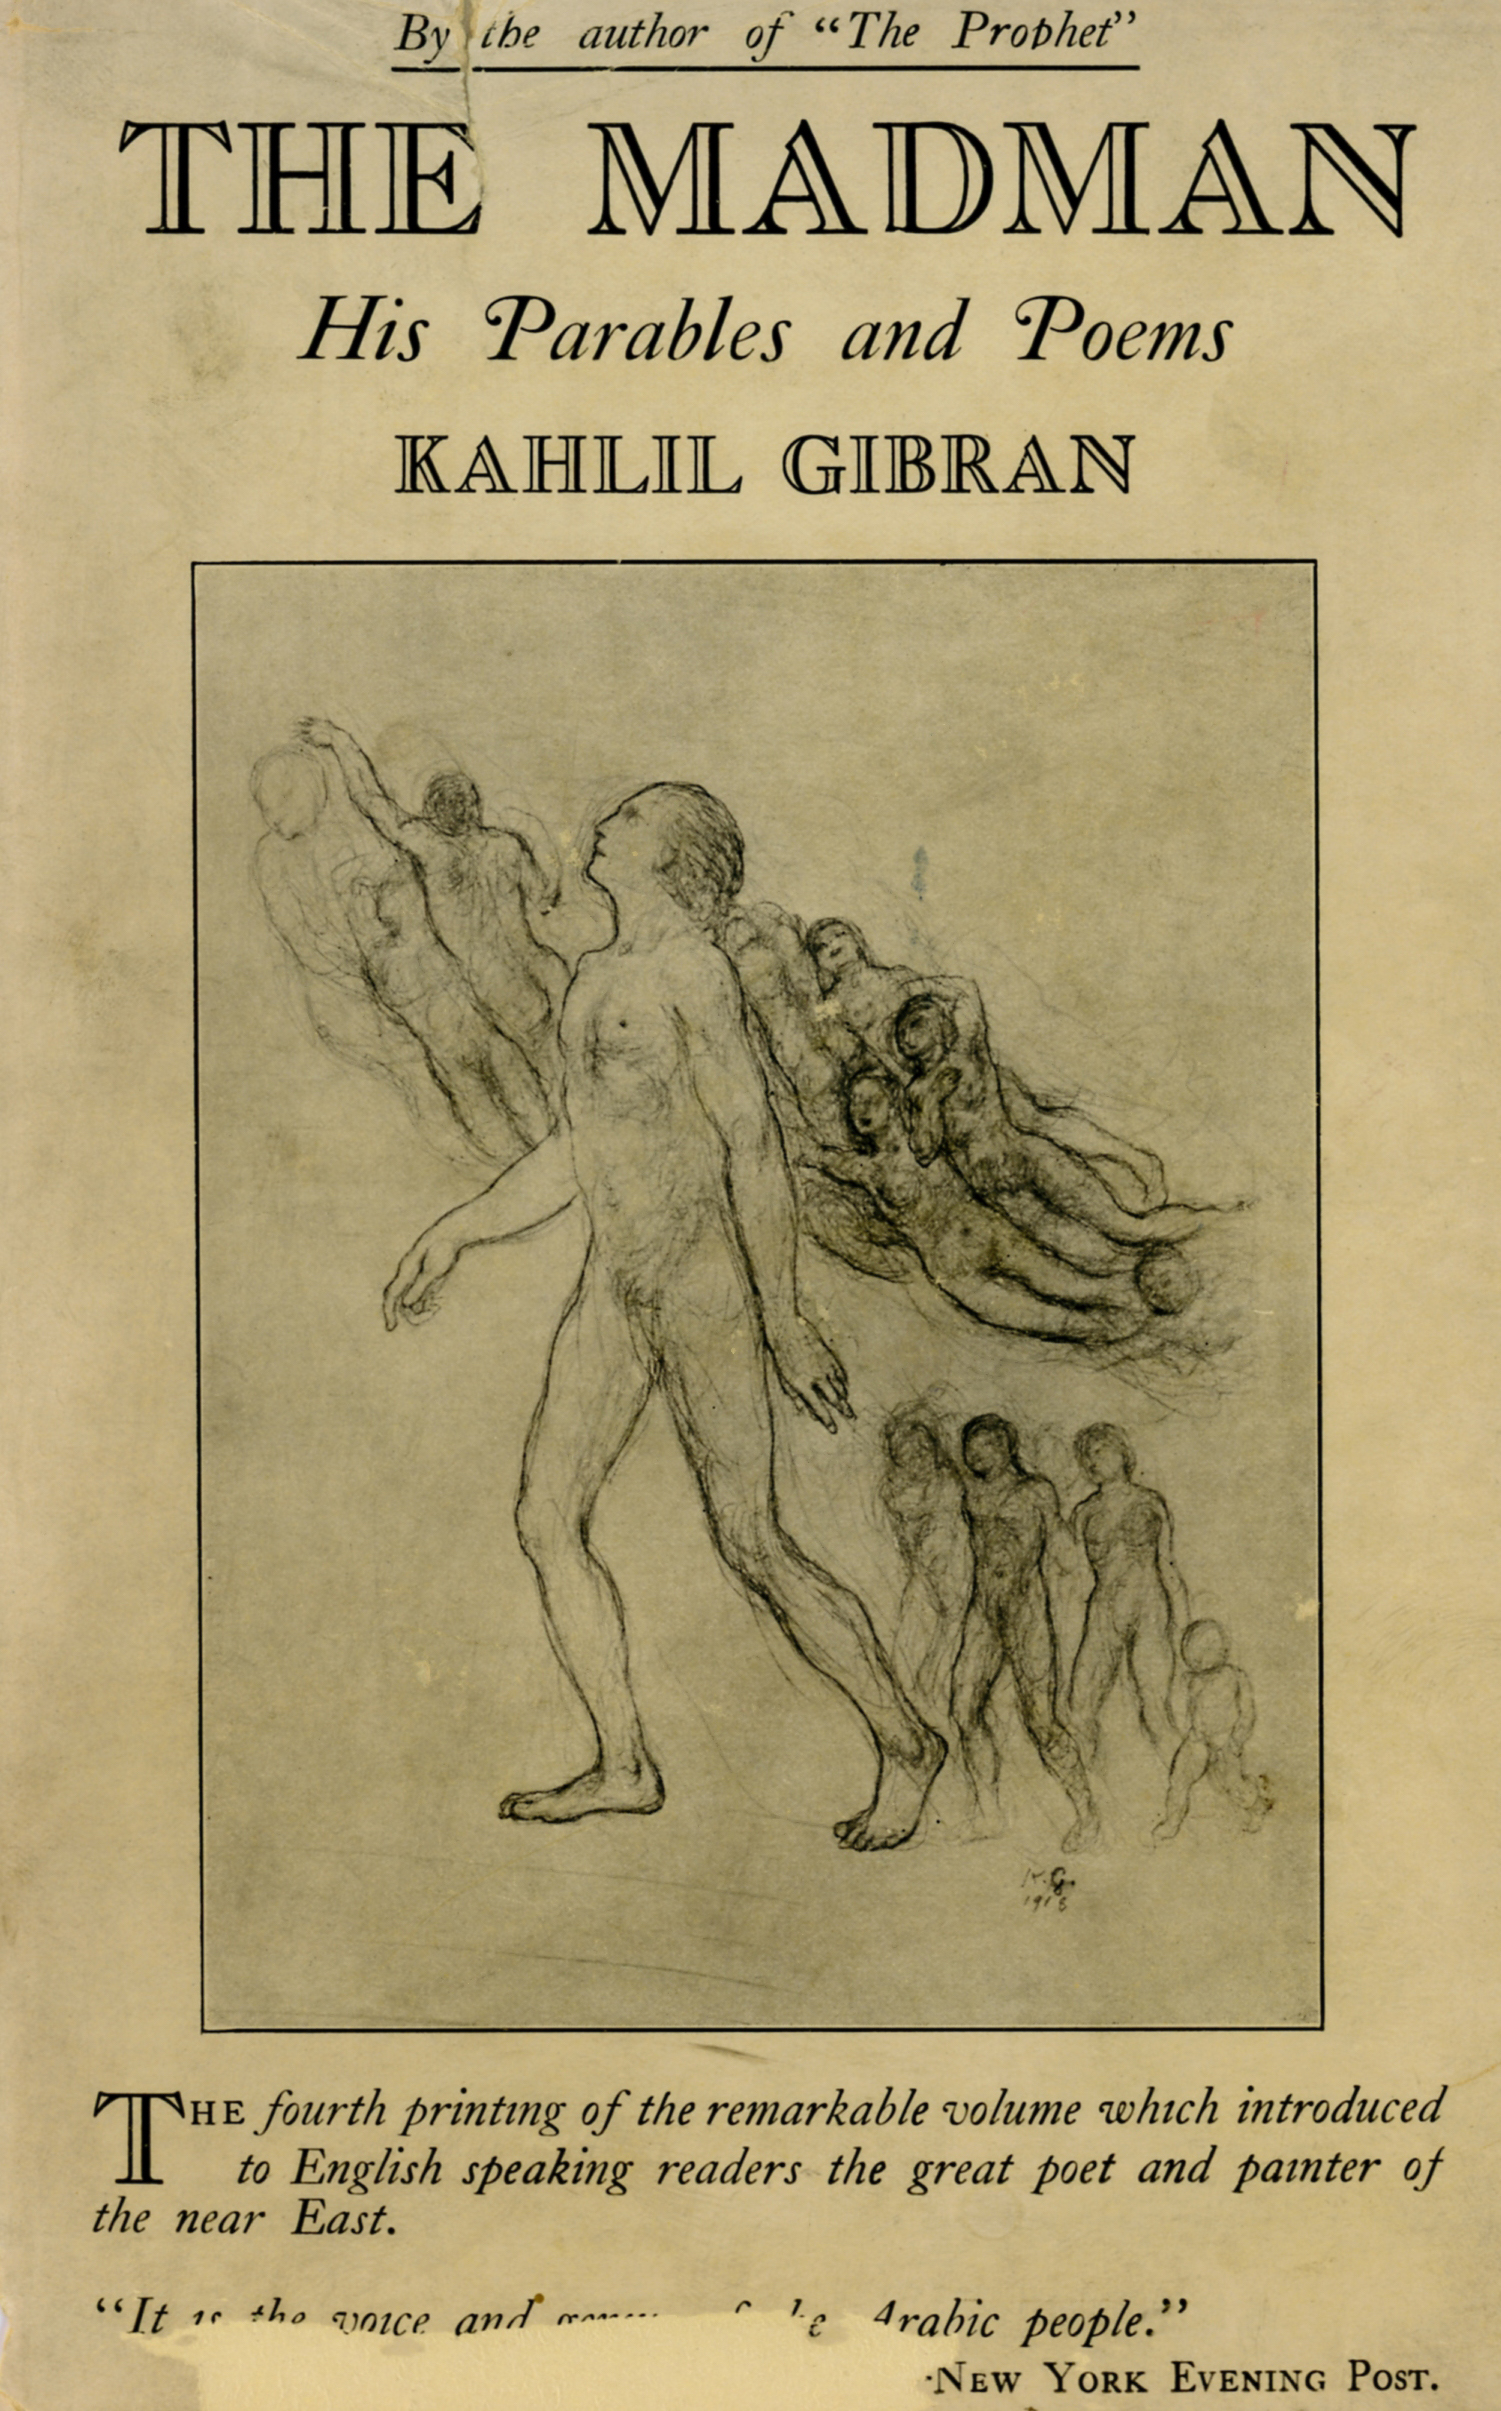 The Madman: His Parables and Poems, New York: Knopf, 1918.